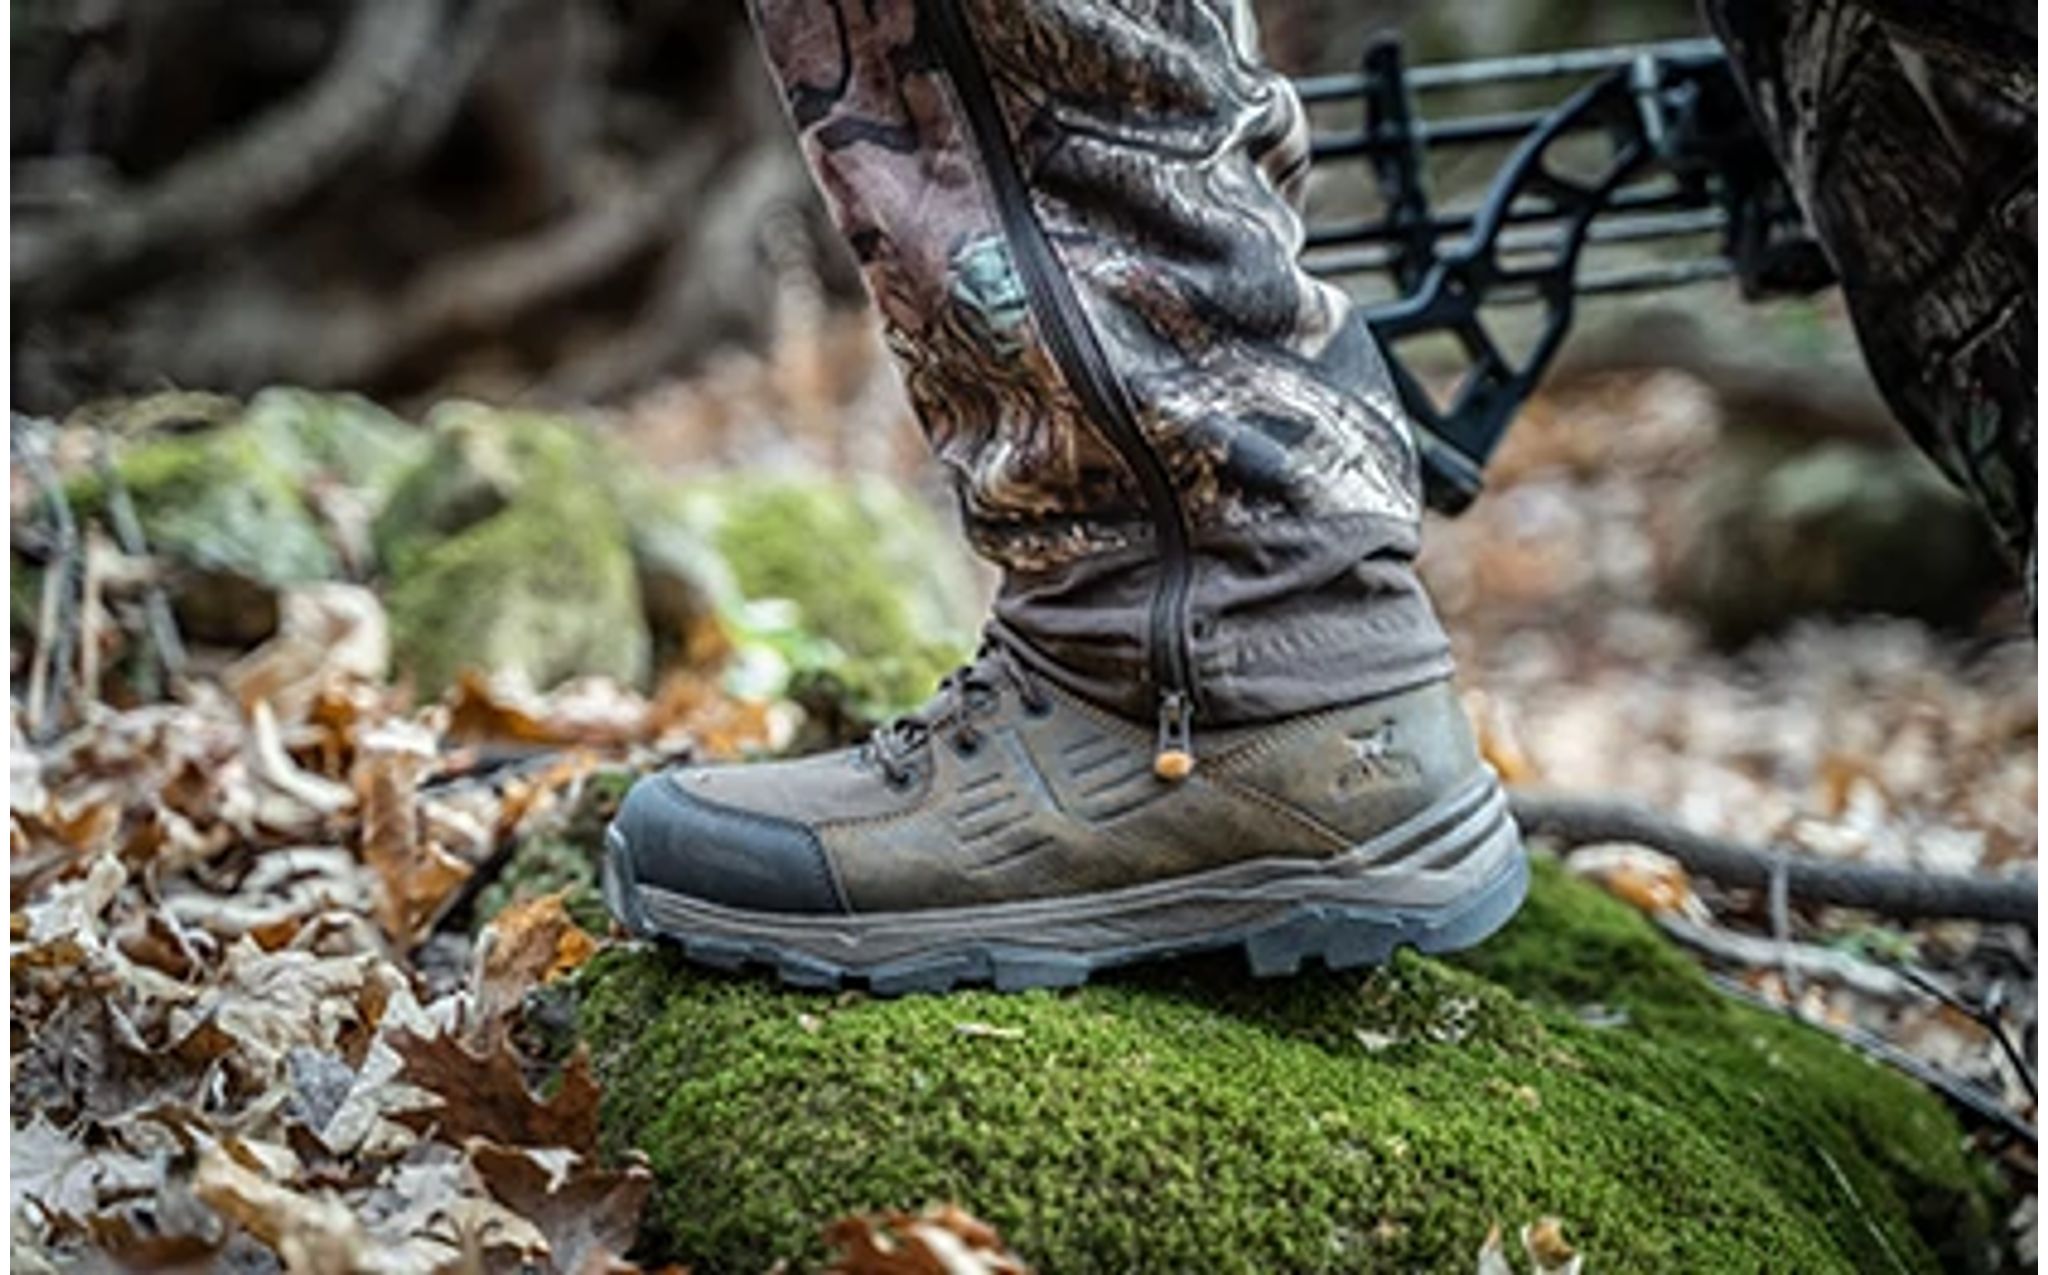 Irish Setter | Purpose-Built Work Boots and Hunting Boots for Men and Women